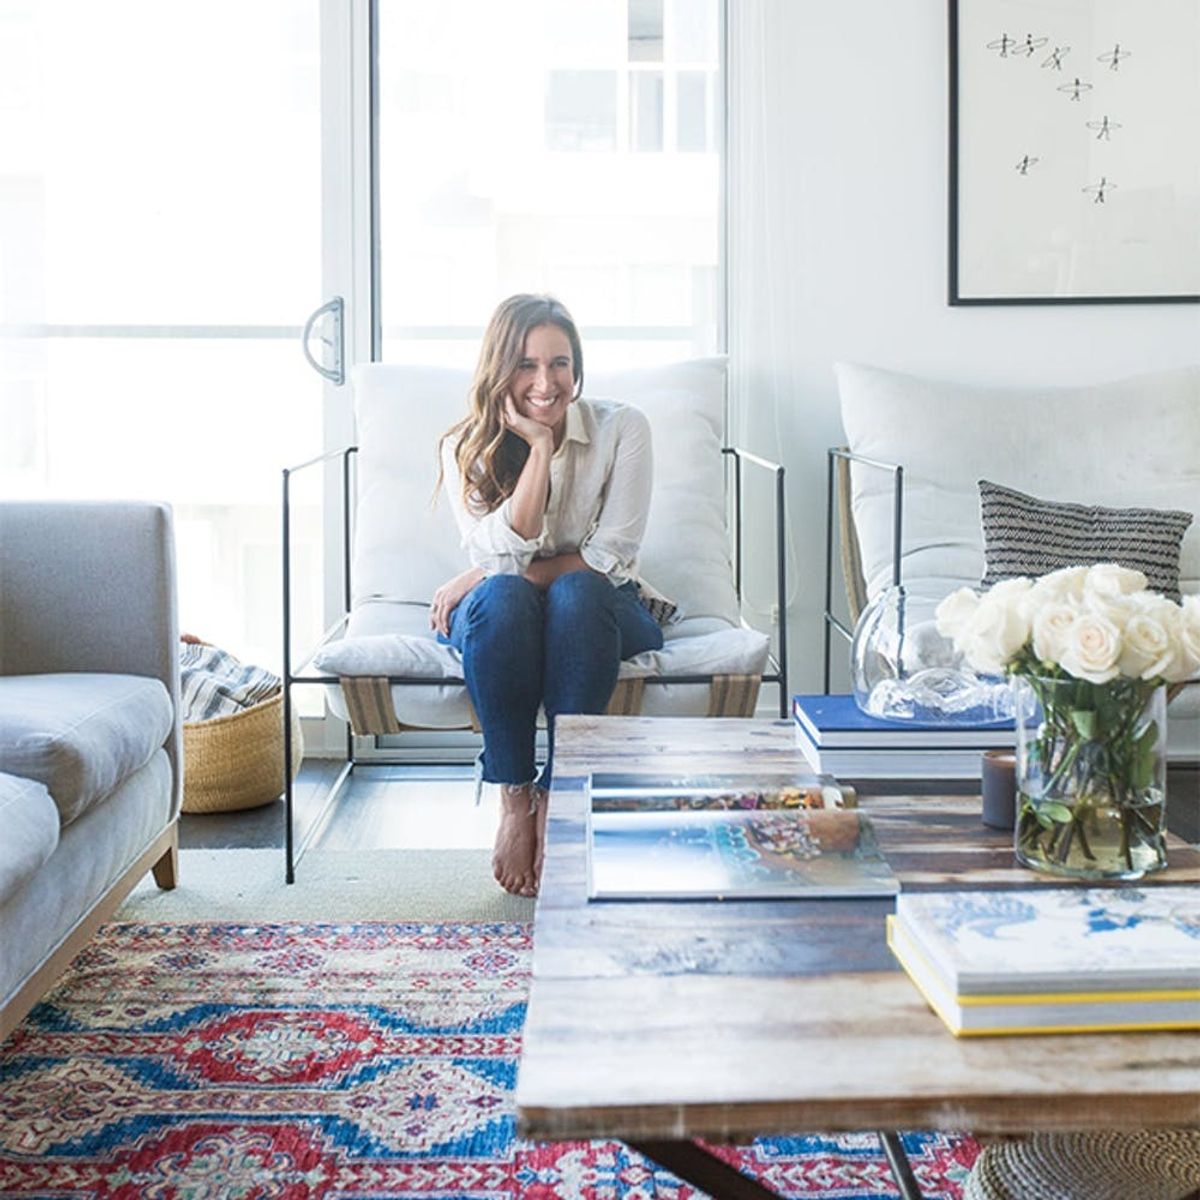 Interior Design App Hutch Helped Transform This Artist’s Loft into a Picture-Perfect Space